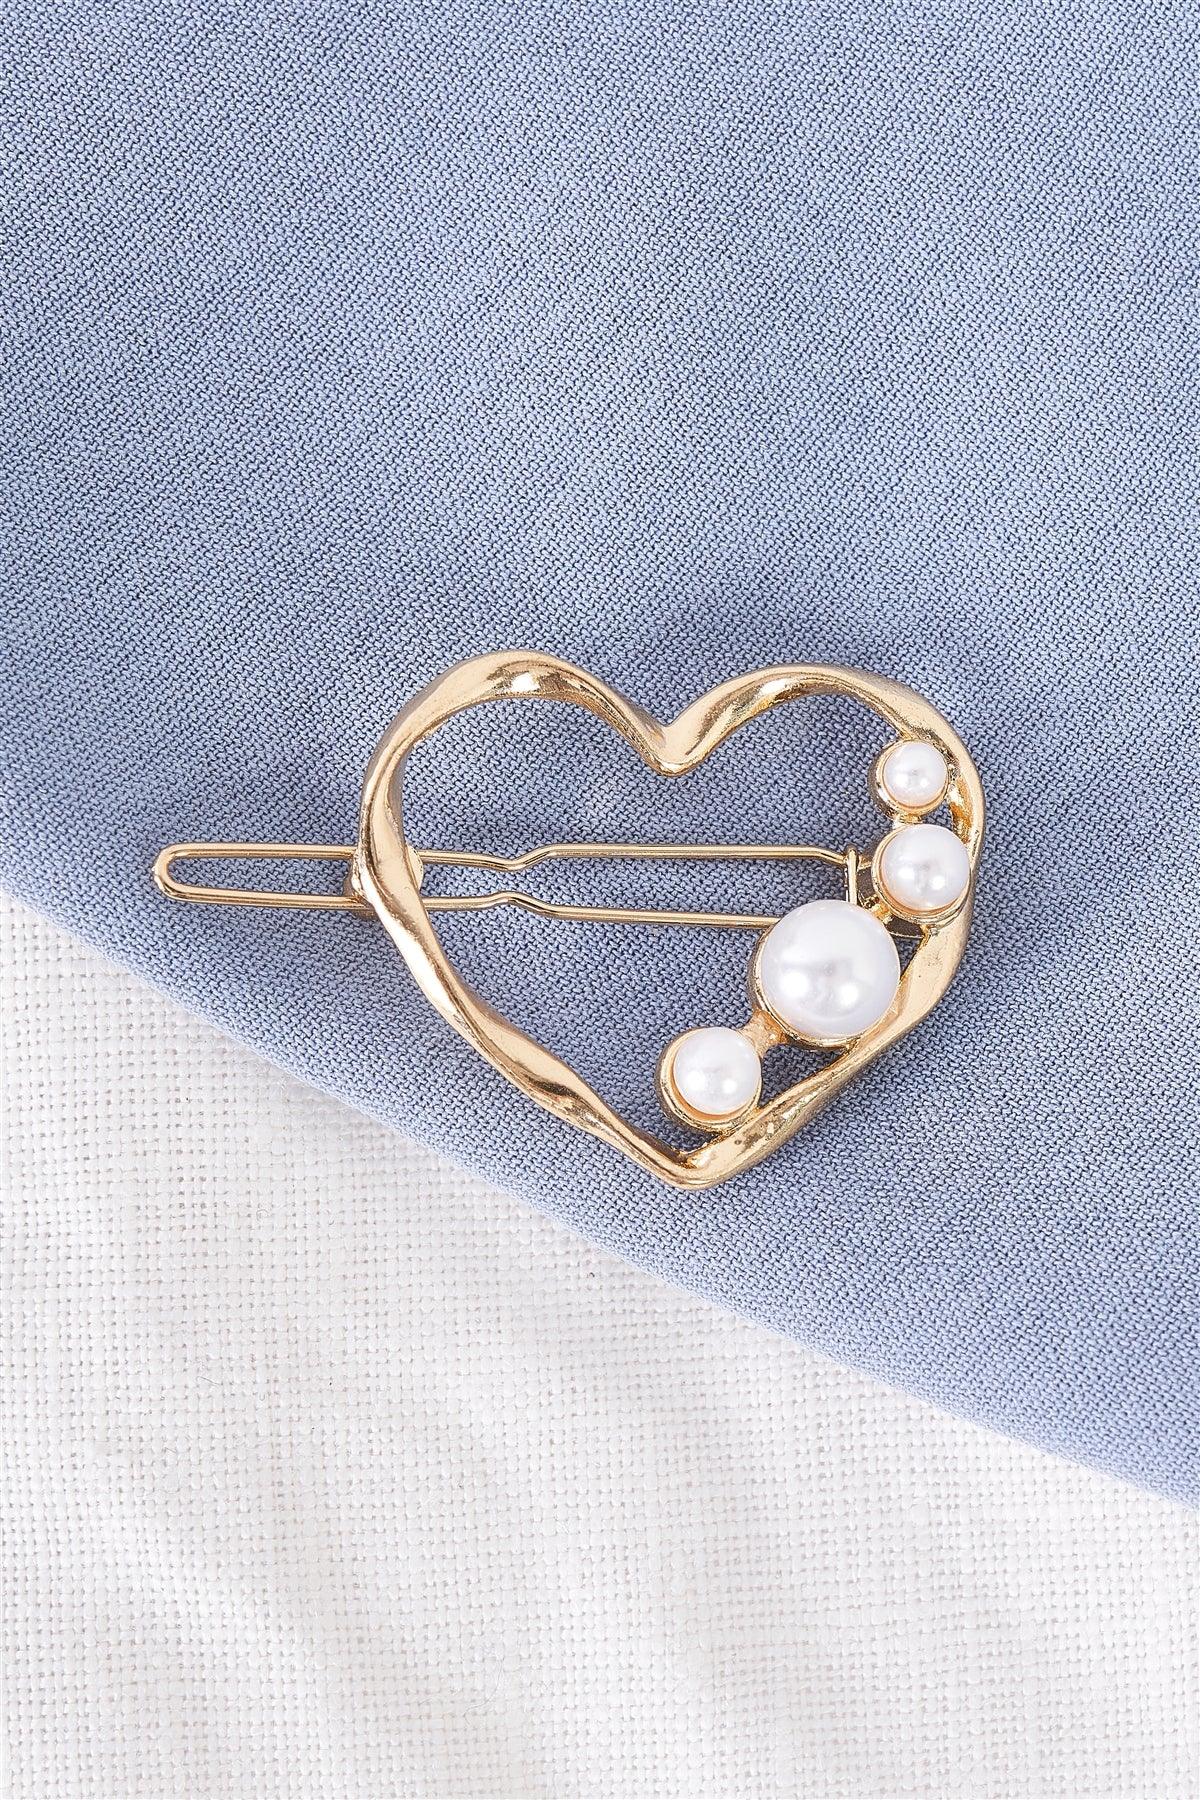 Gold & Pearl Twisted Heart Shaped Hair Clip /3 Pieces